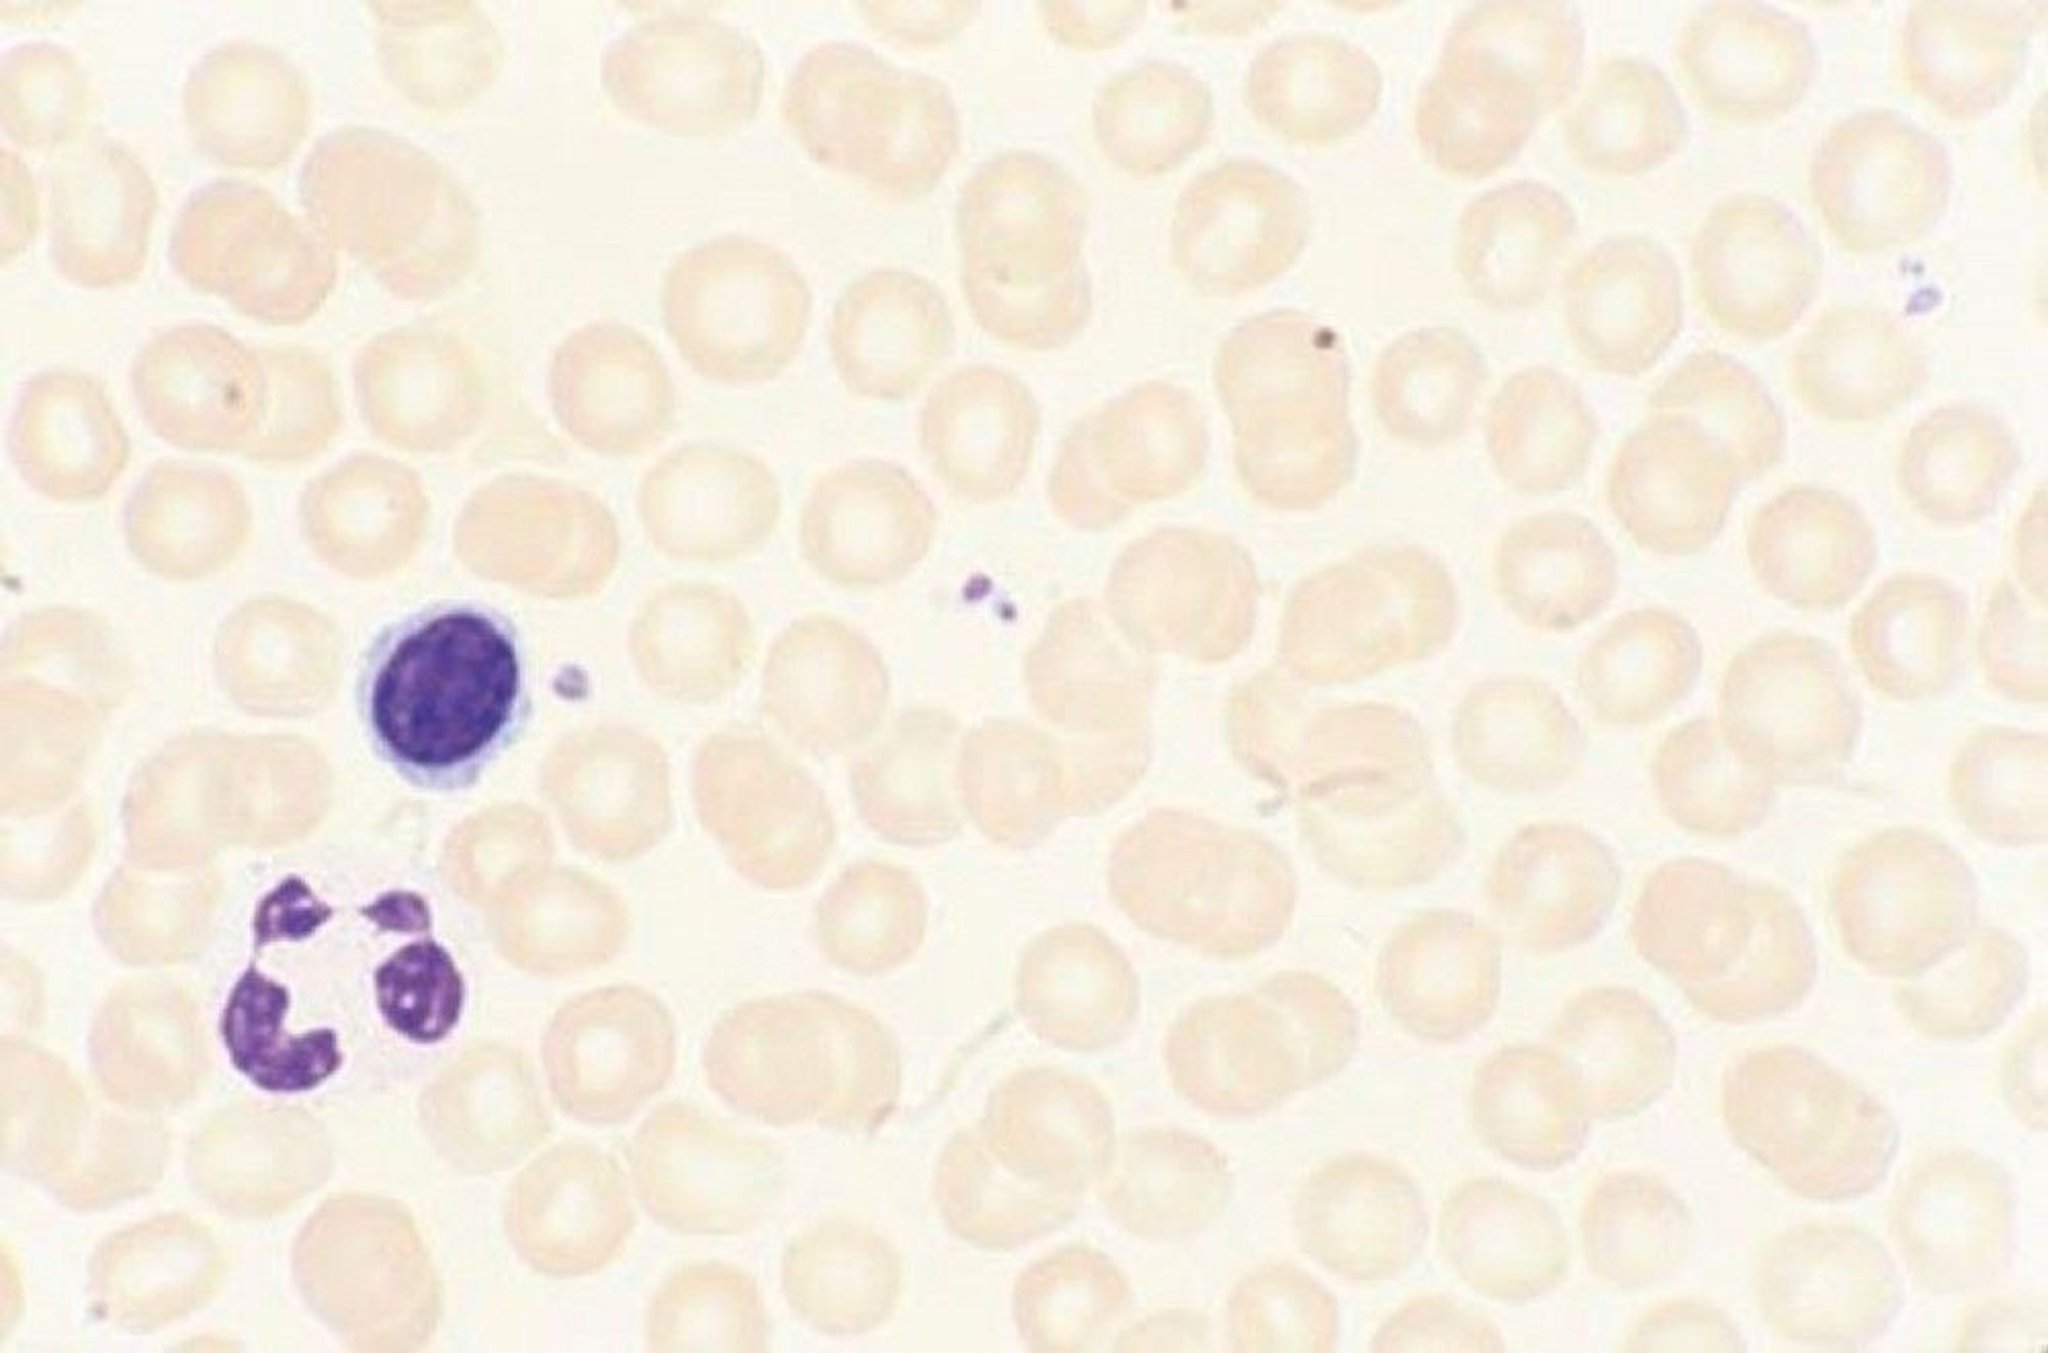 Wright-Giemsa Stain of Peripheral Blood Smear